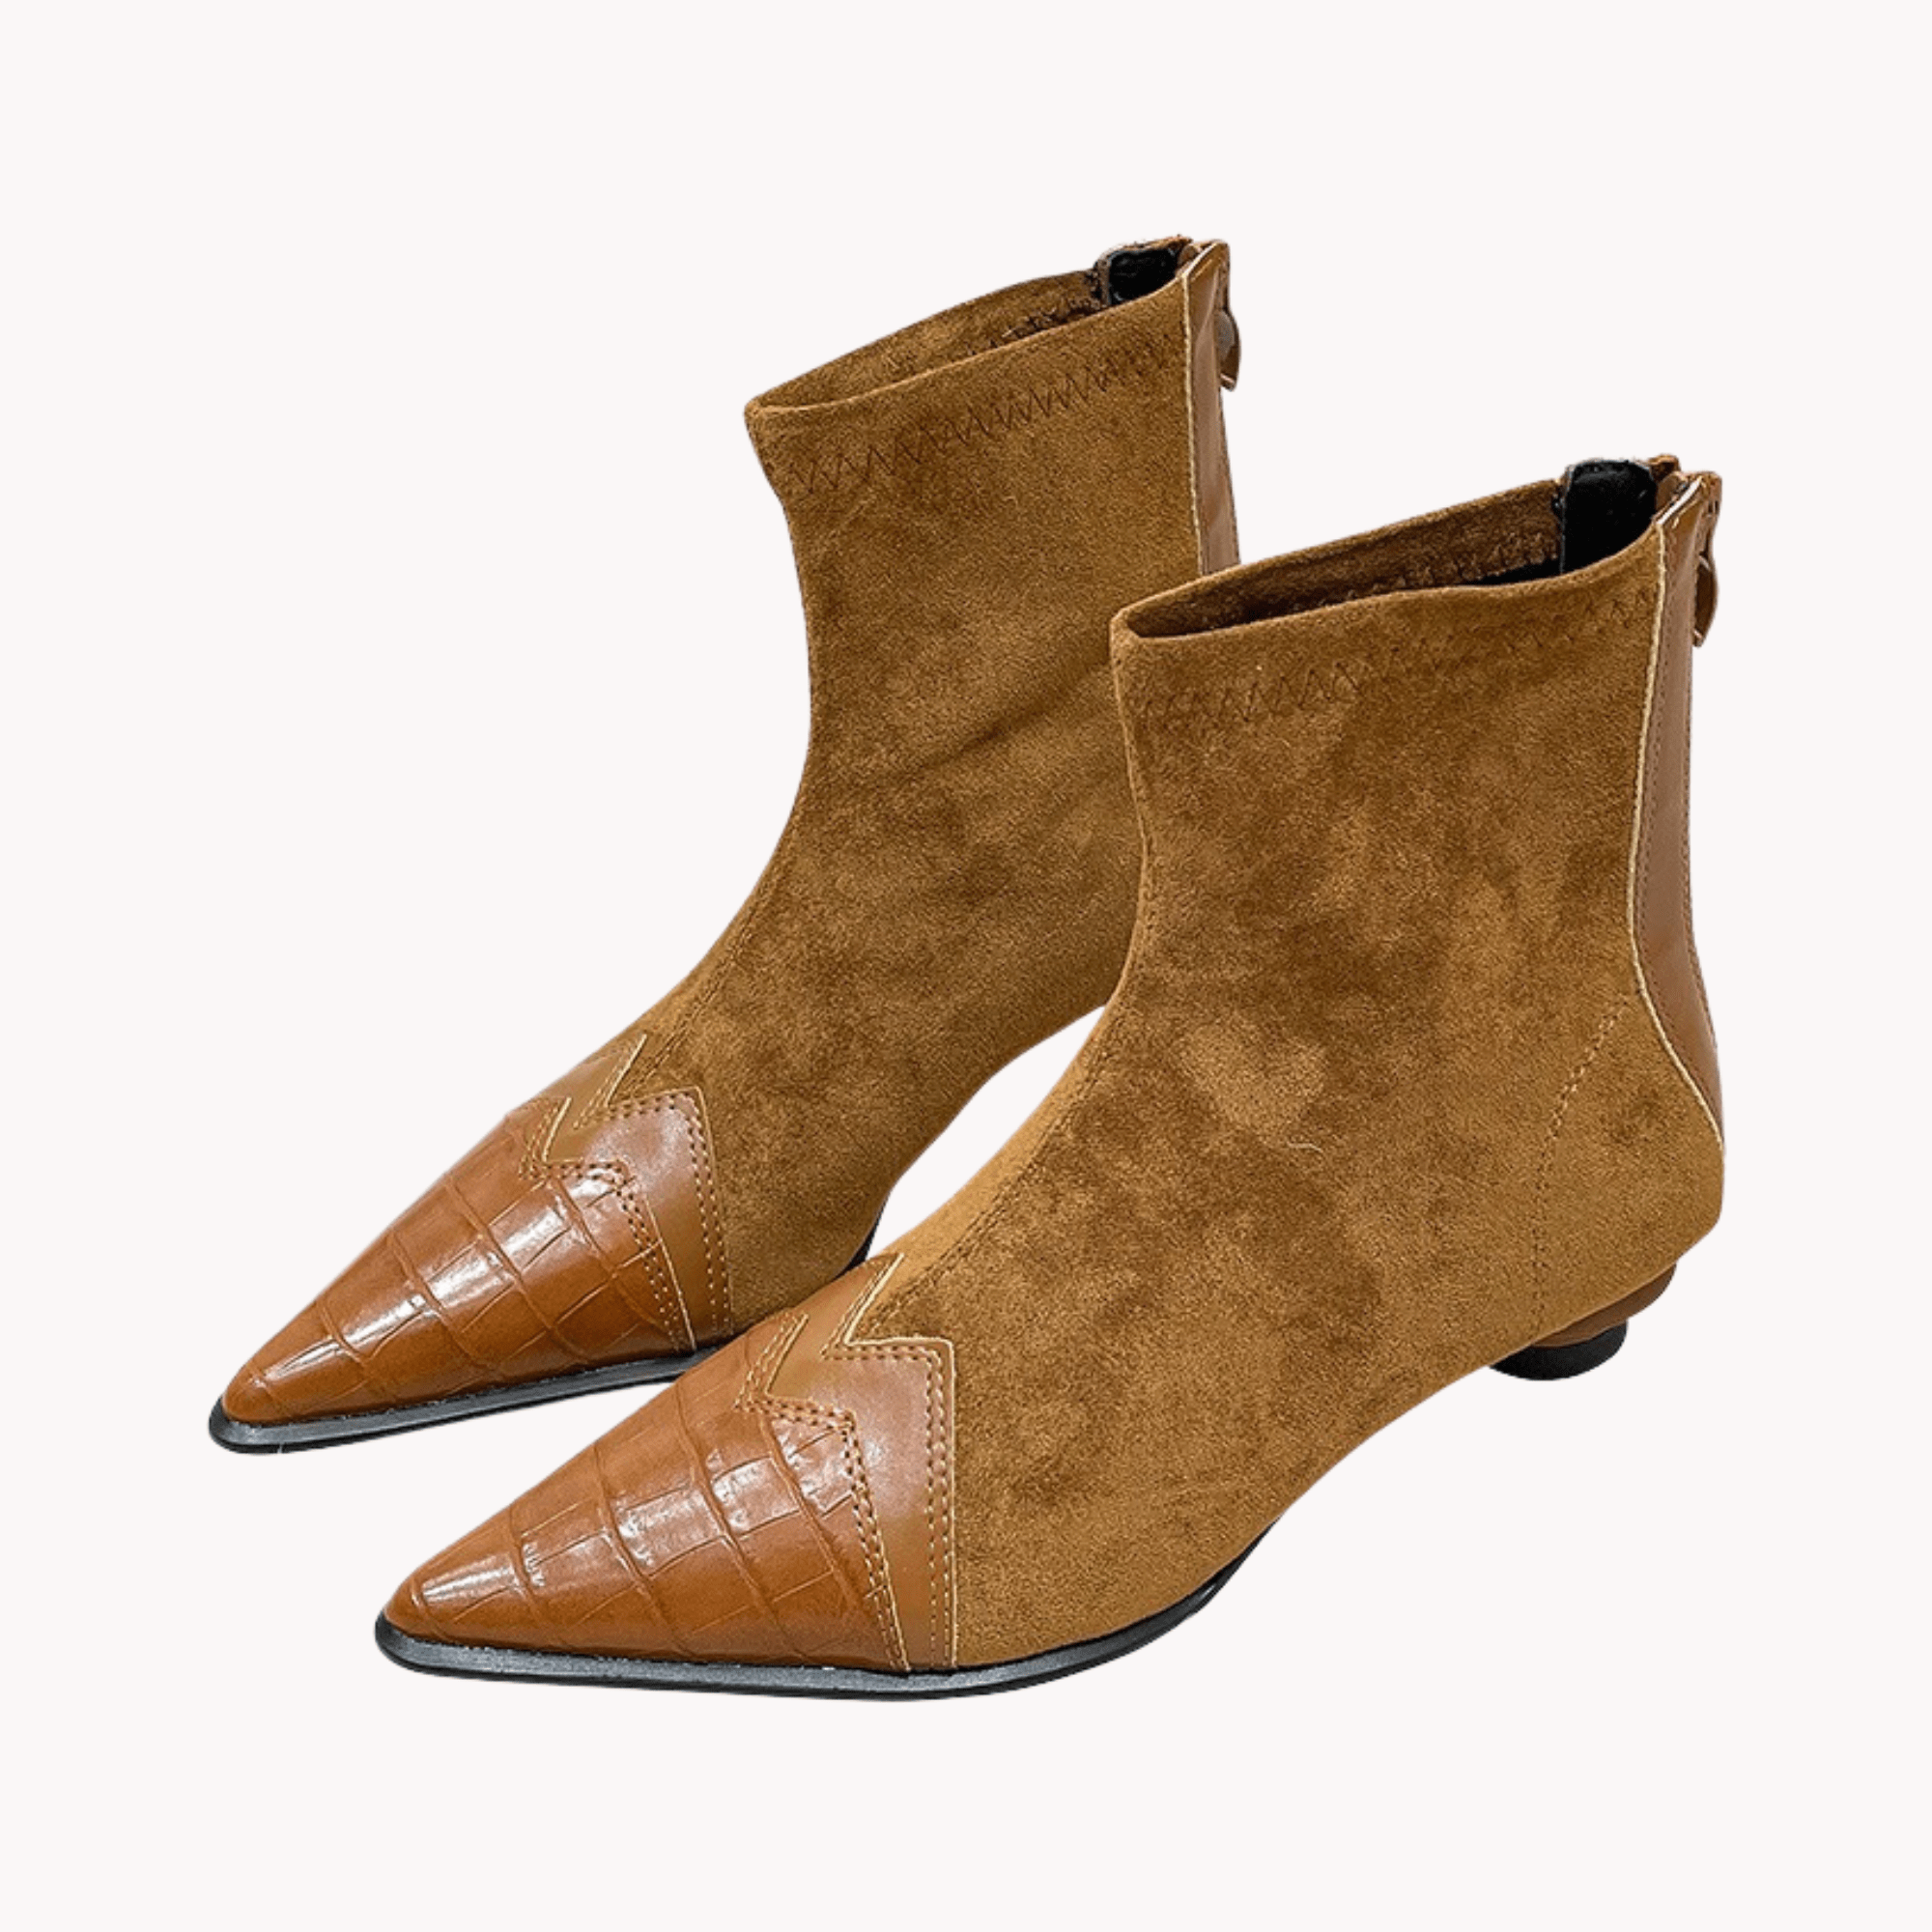 Suede Low Heel Ankle Boots - Kelly Obi New York